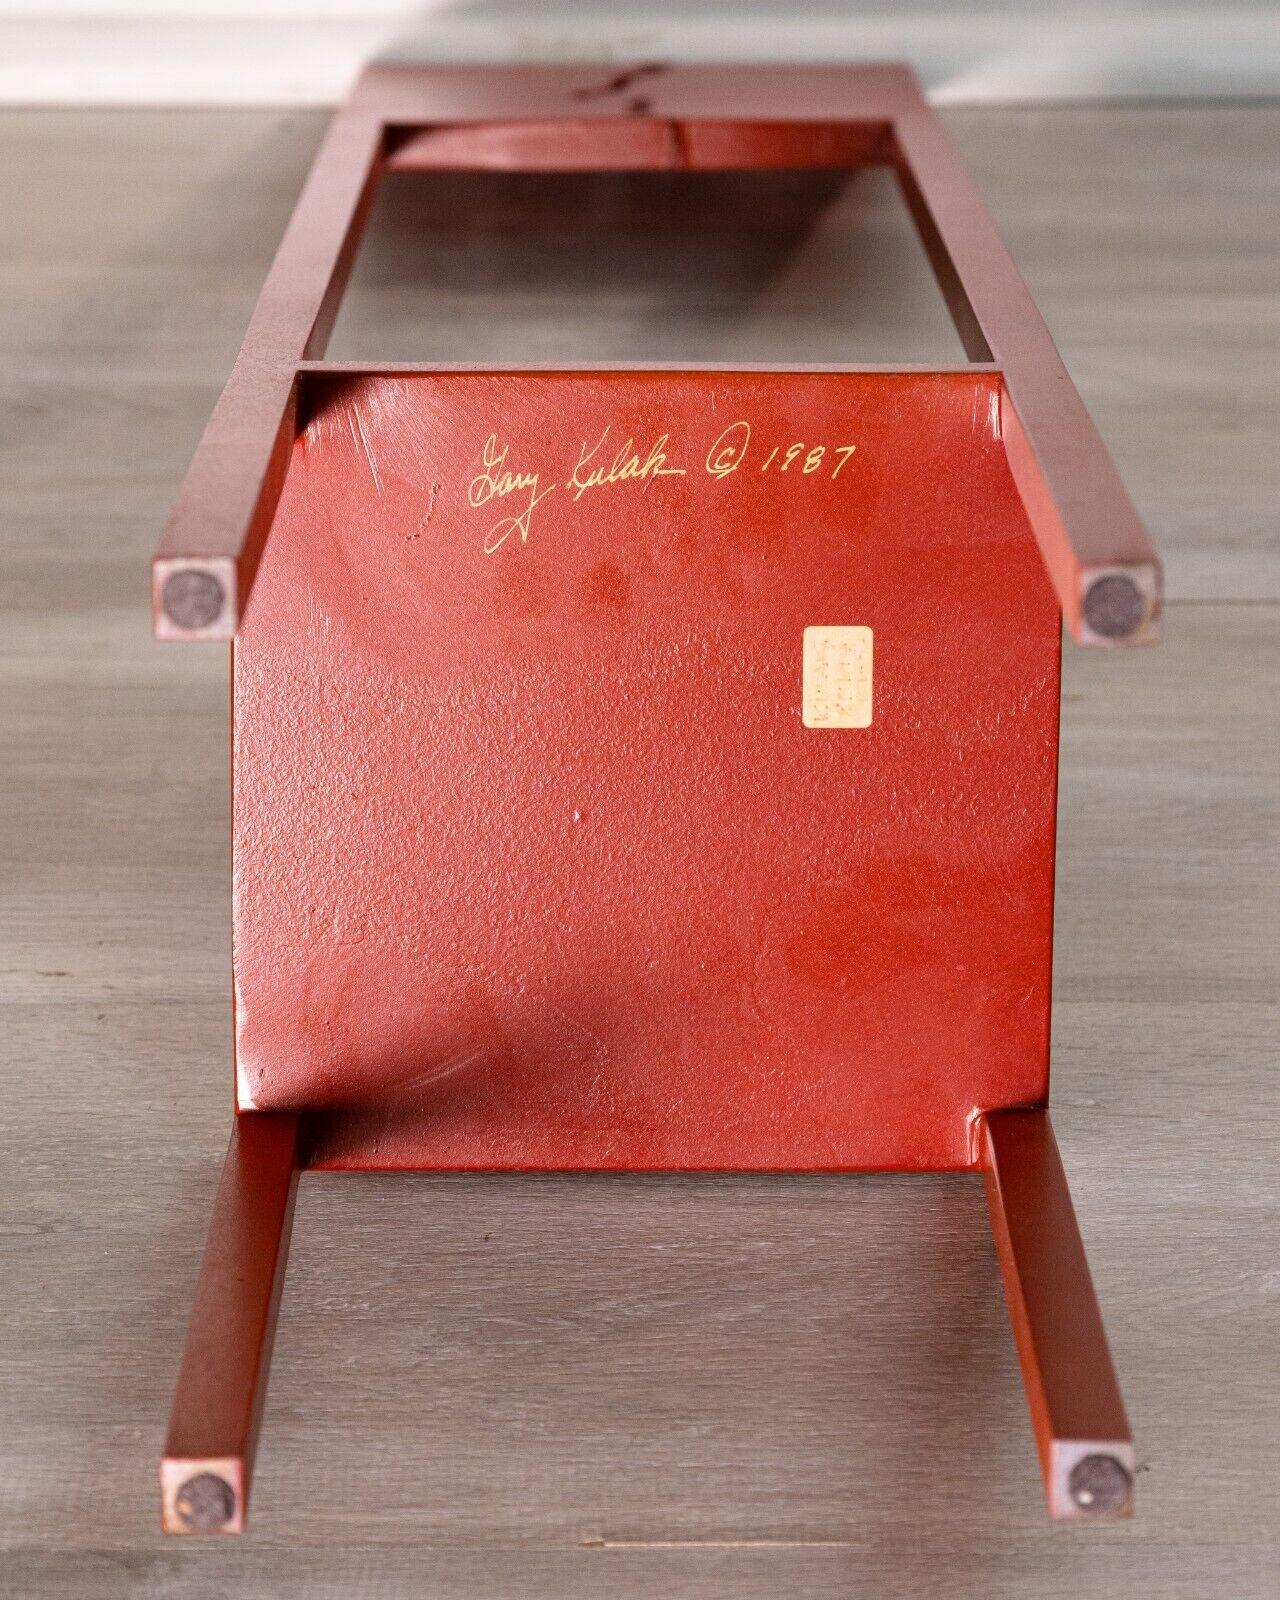 Gary Kulak Small Red Painted Bronze Decorative Fine Art Chair 1987 Vintage Decor For Sale 1